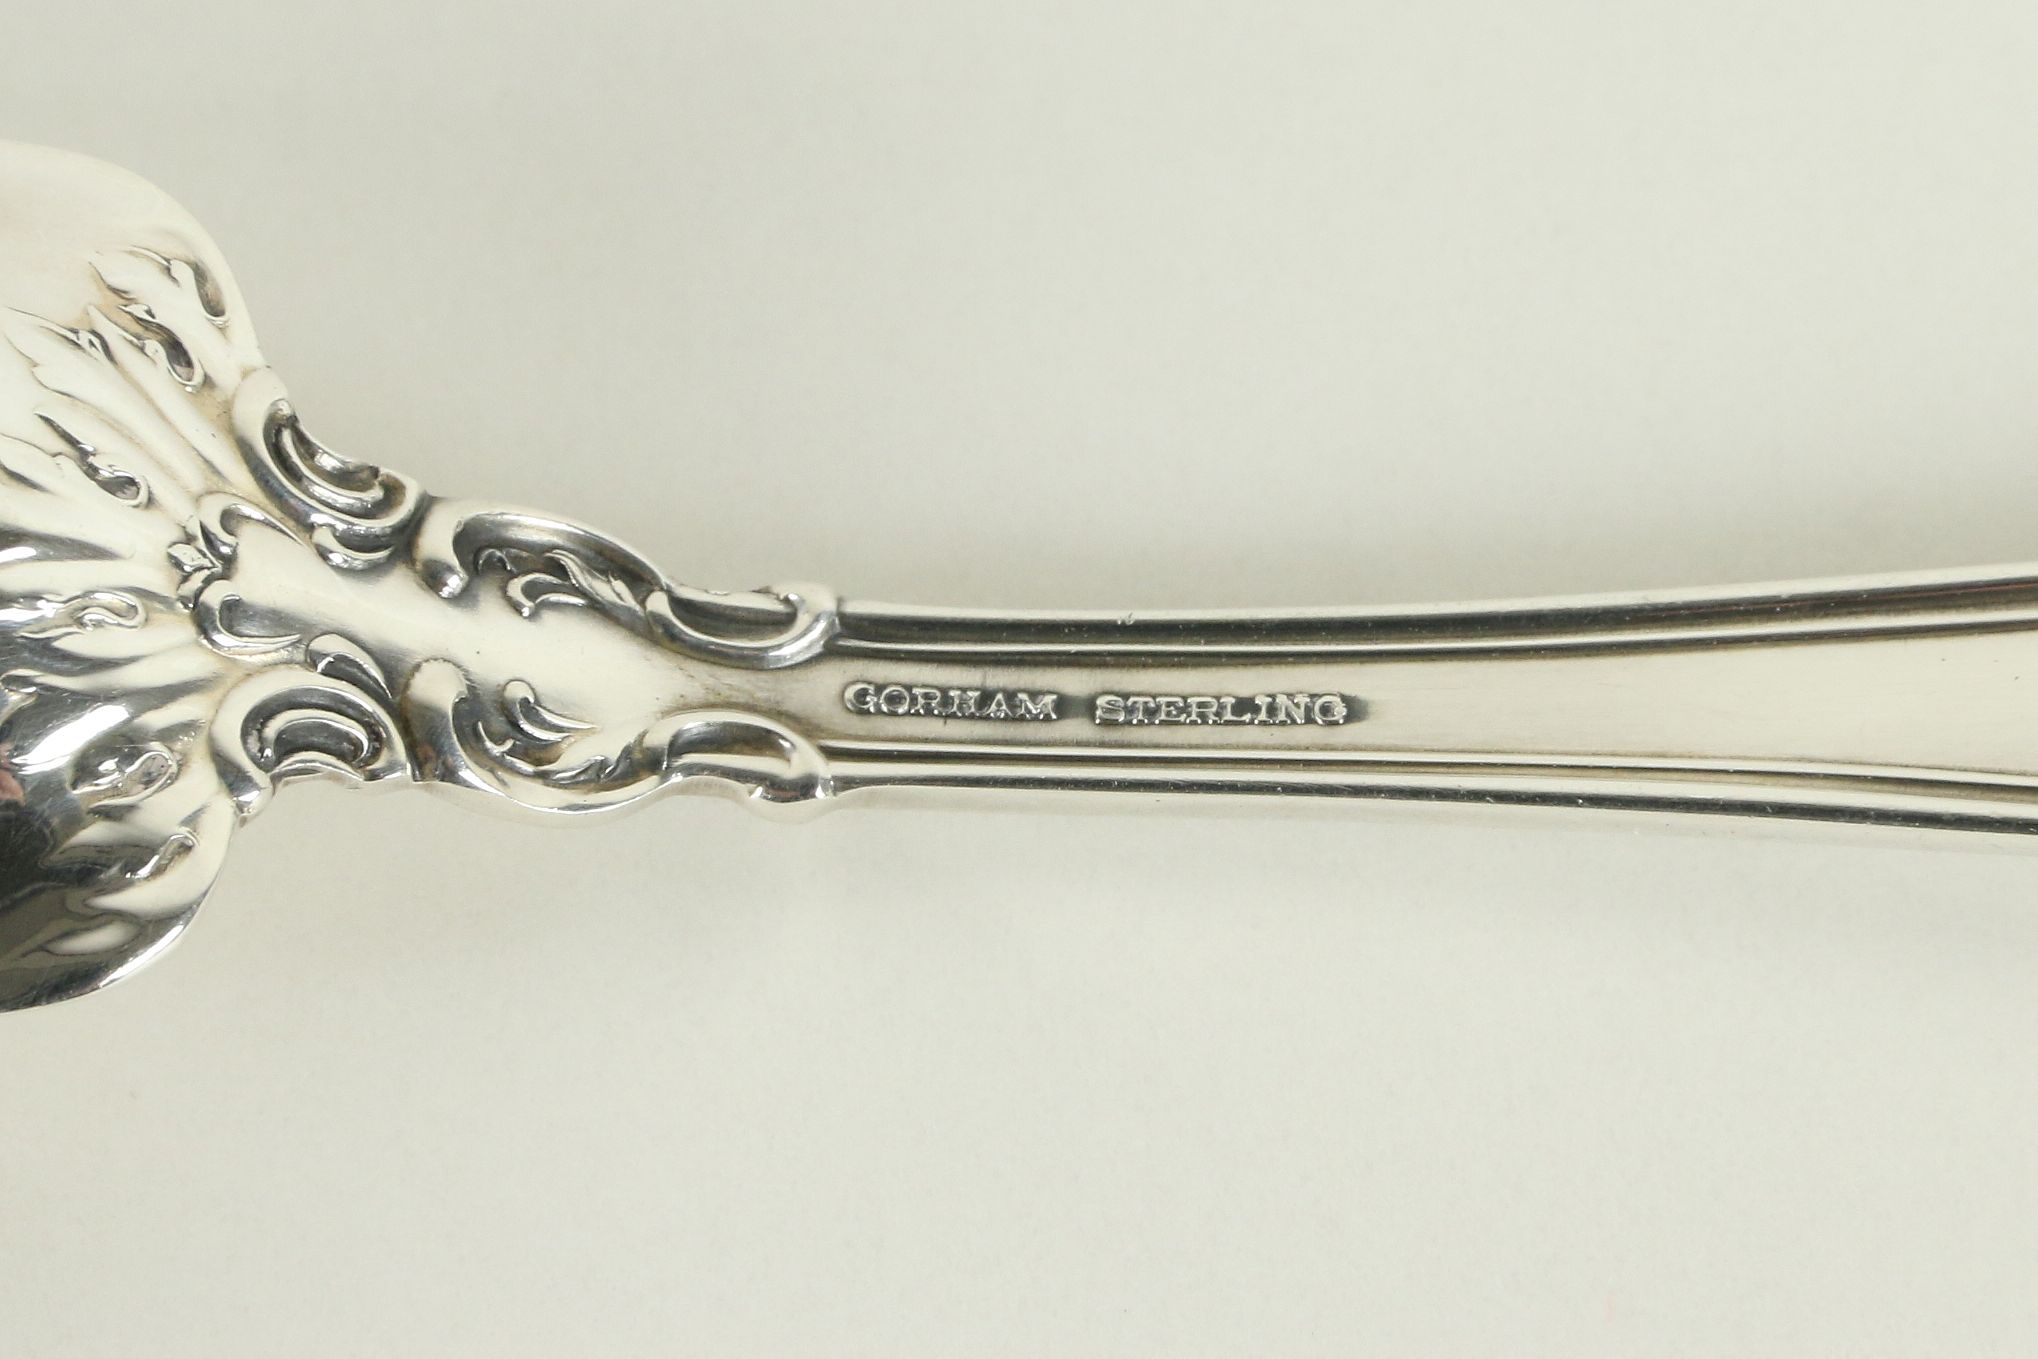 Set of 6 Gorham Sterling Domestic Tablespoons (Serving Spoons) for sale at  auction on 16th December